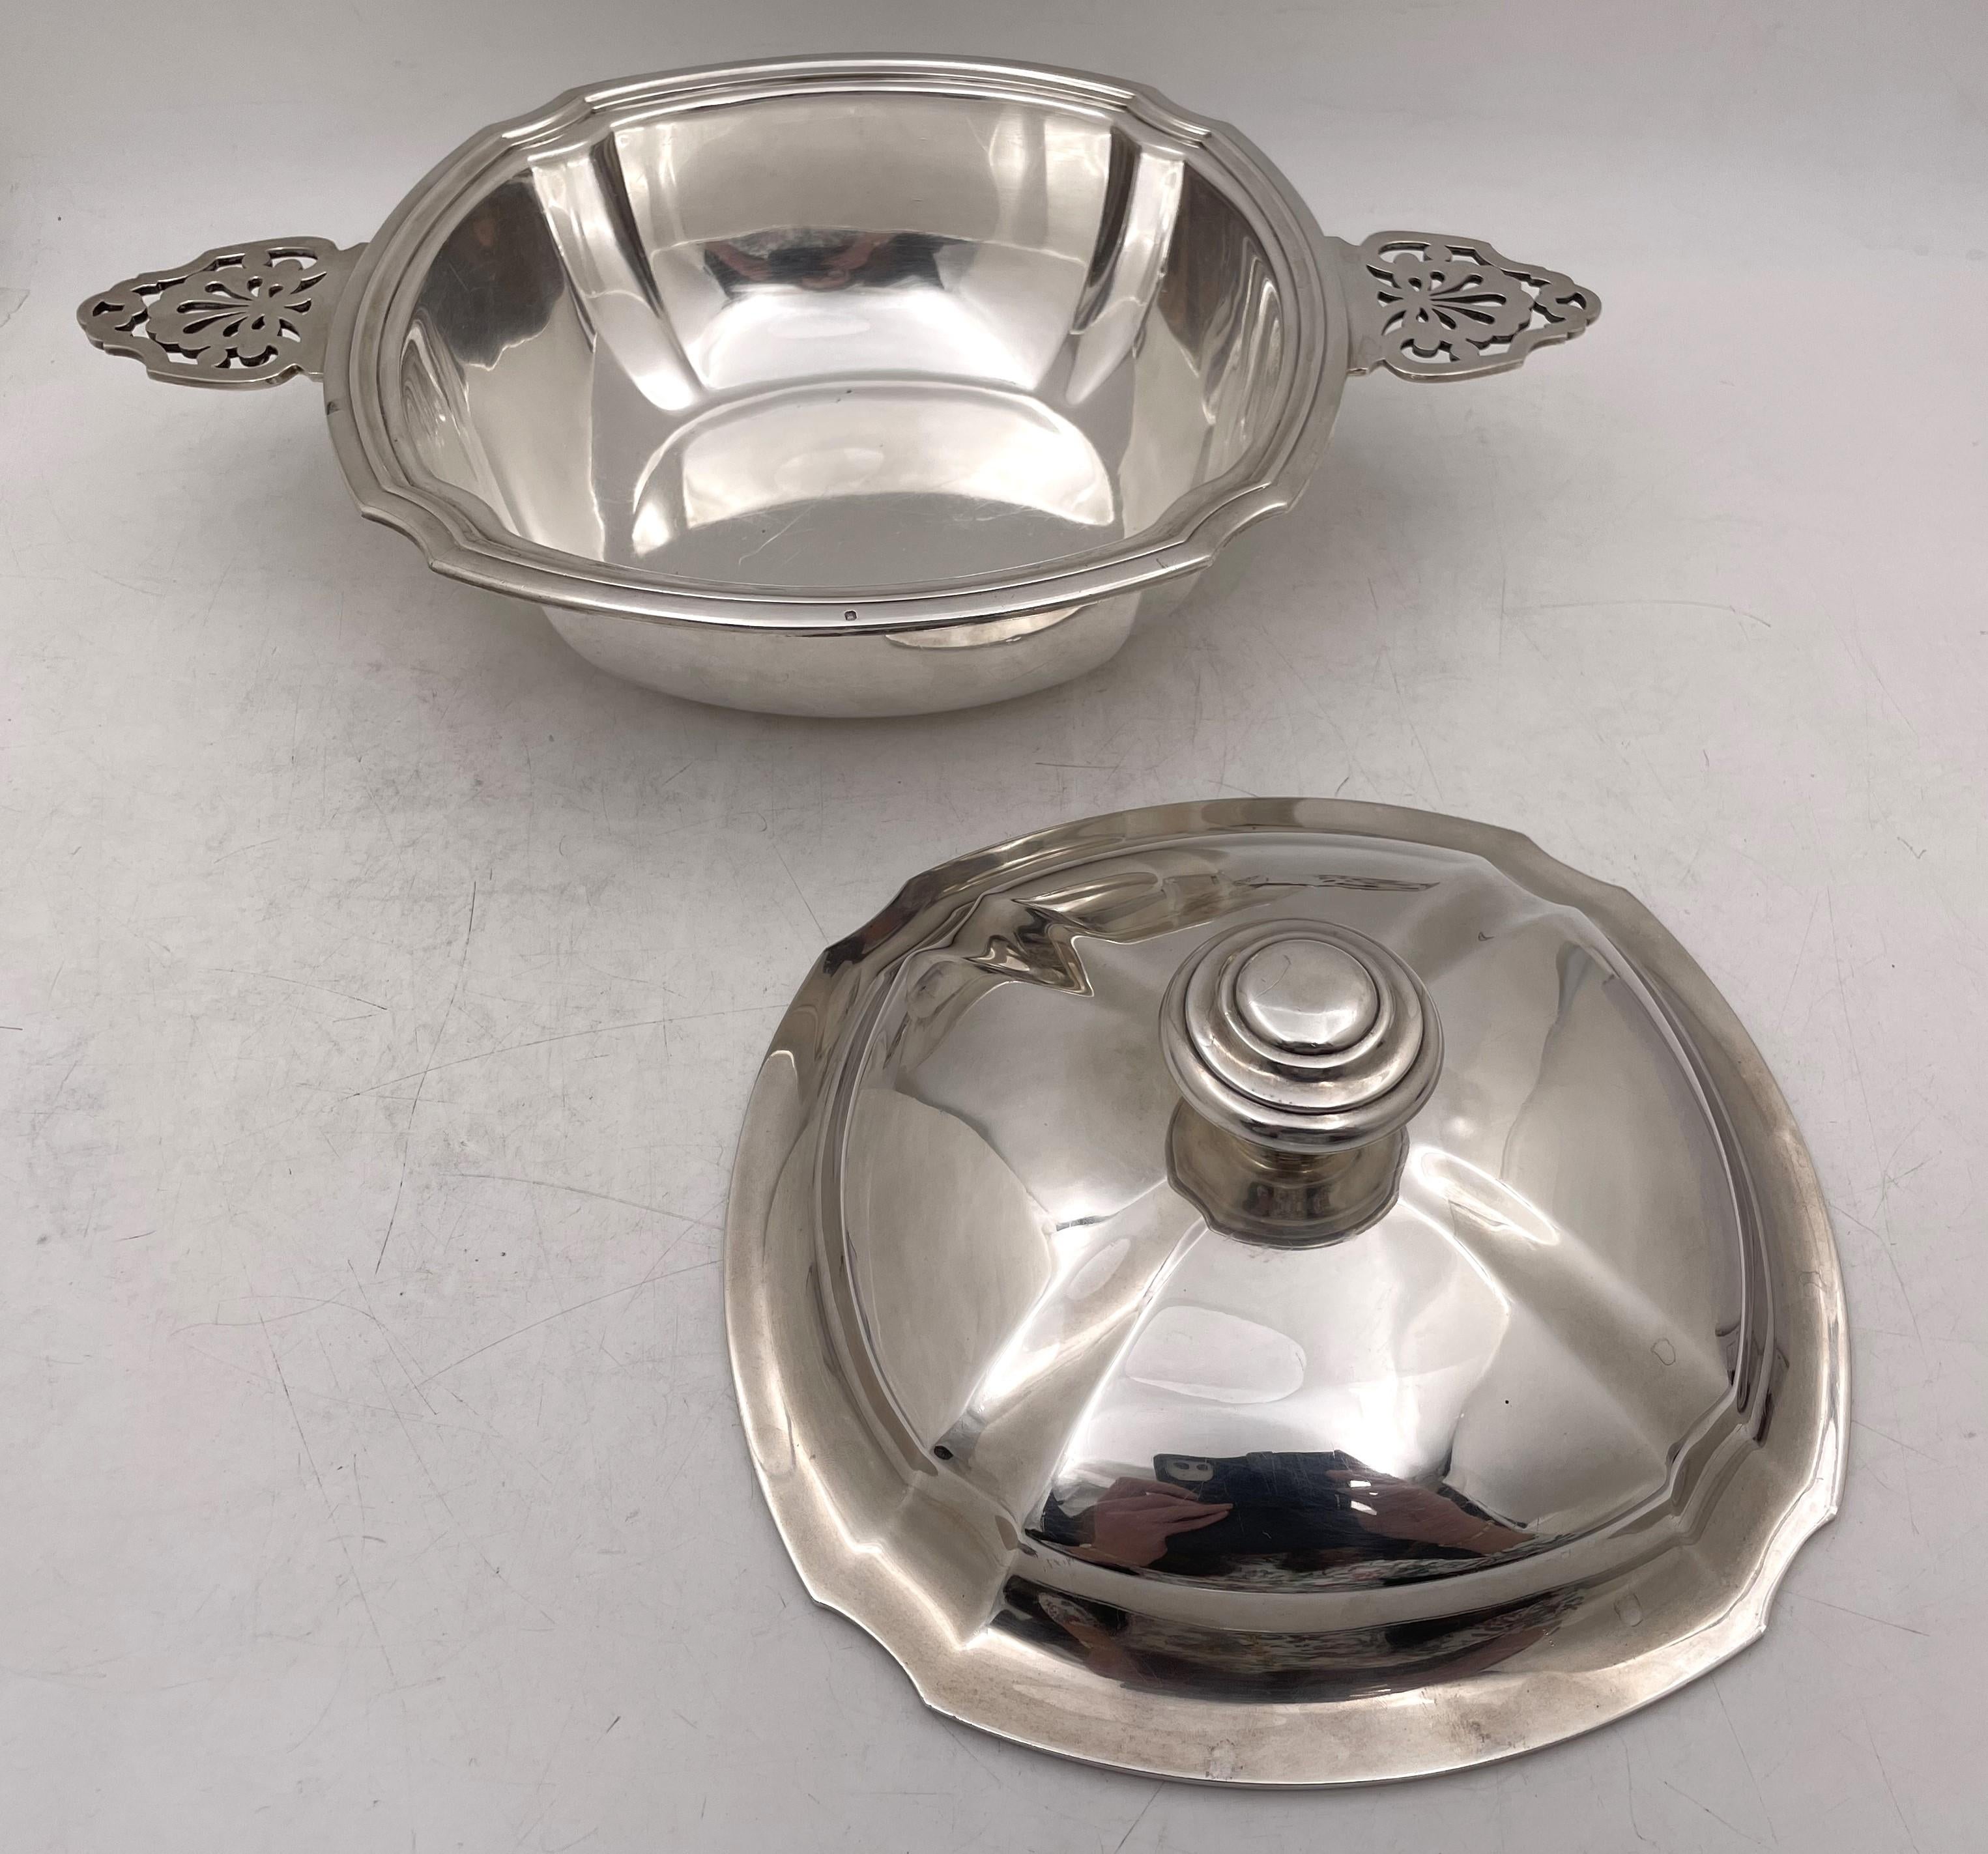 Christofle, French, 0.950 (higher purity than sterling) silver two-handled covered dish bowl or tureen in Art Deco style, with an elegant, geometric design, from the early 20th century, measuring 14 3/4'' from handle to handle by 9 3/4'' in depth by